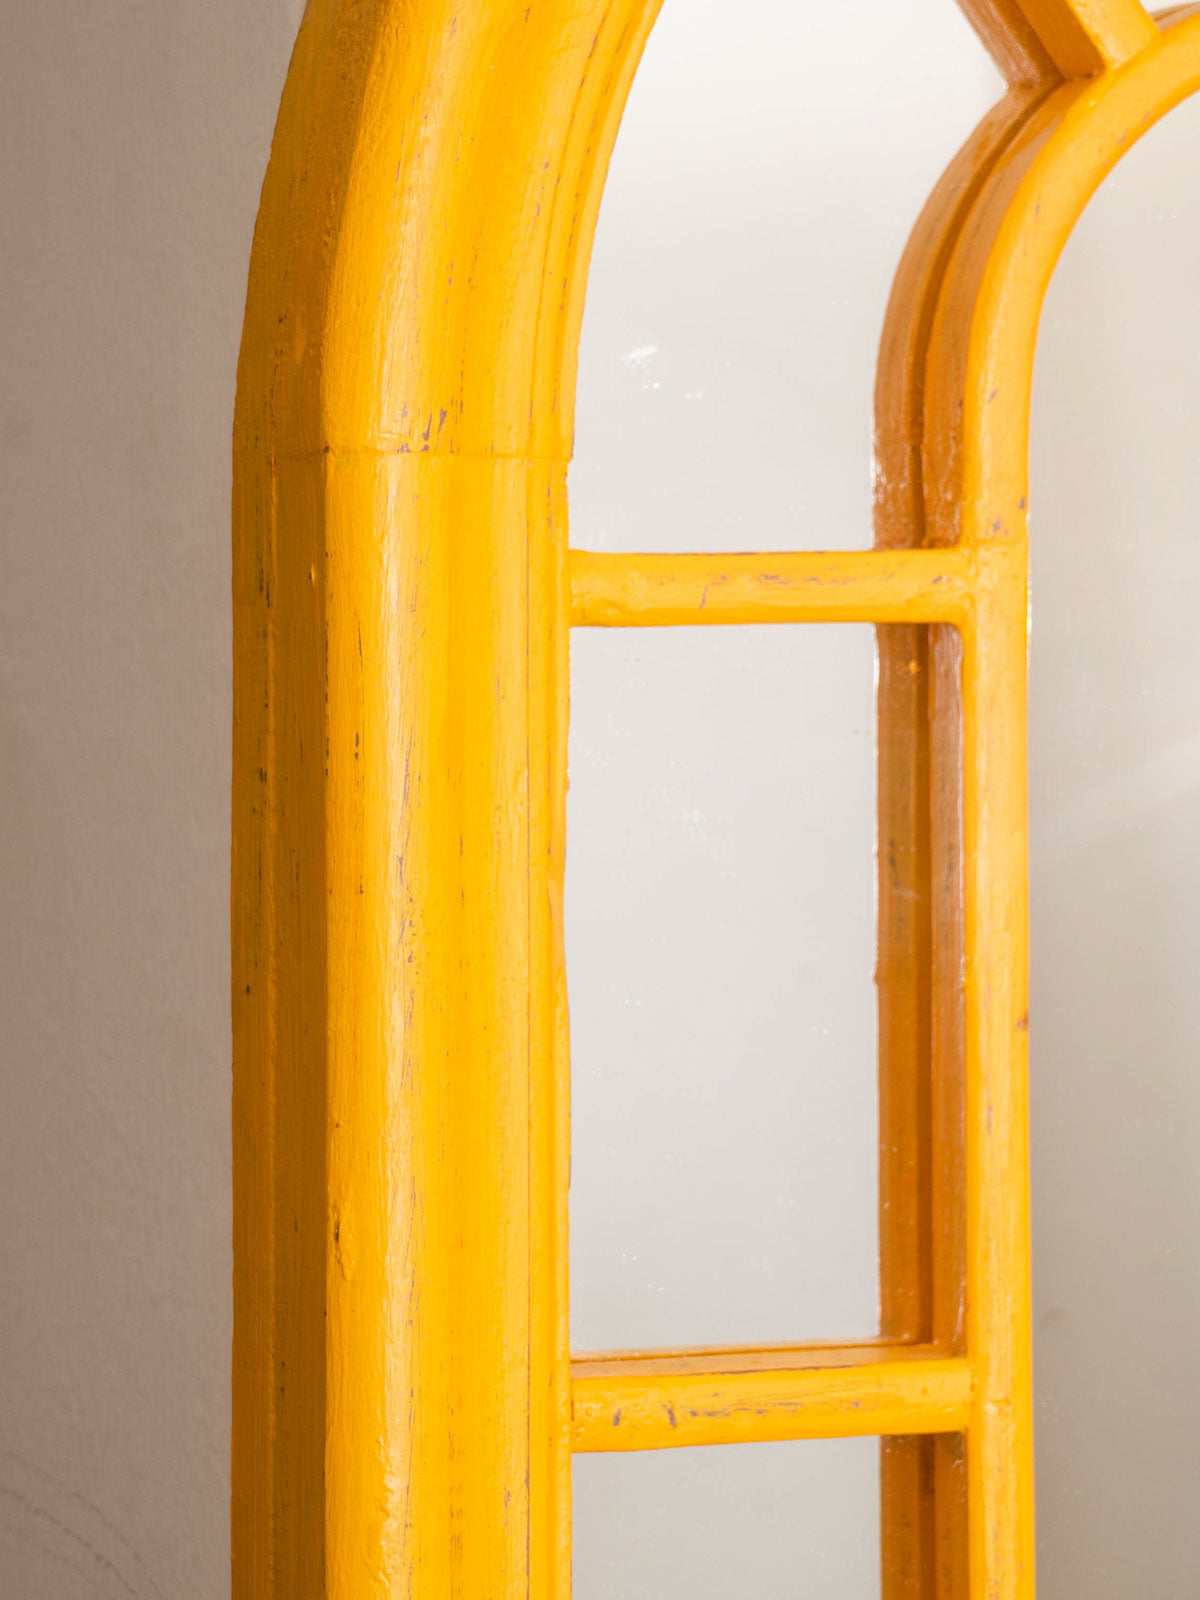 Arched Vintage Mirror - Yellow